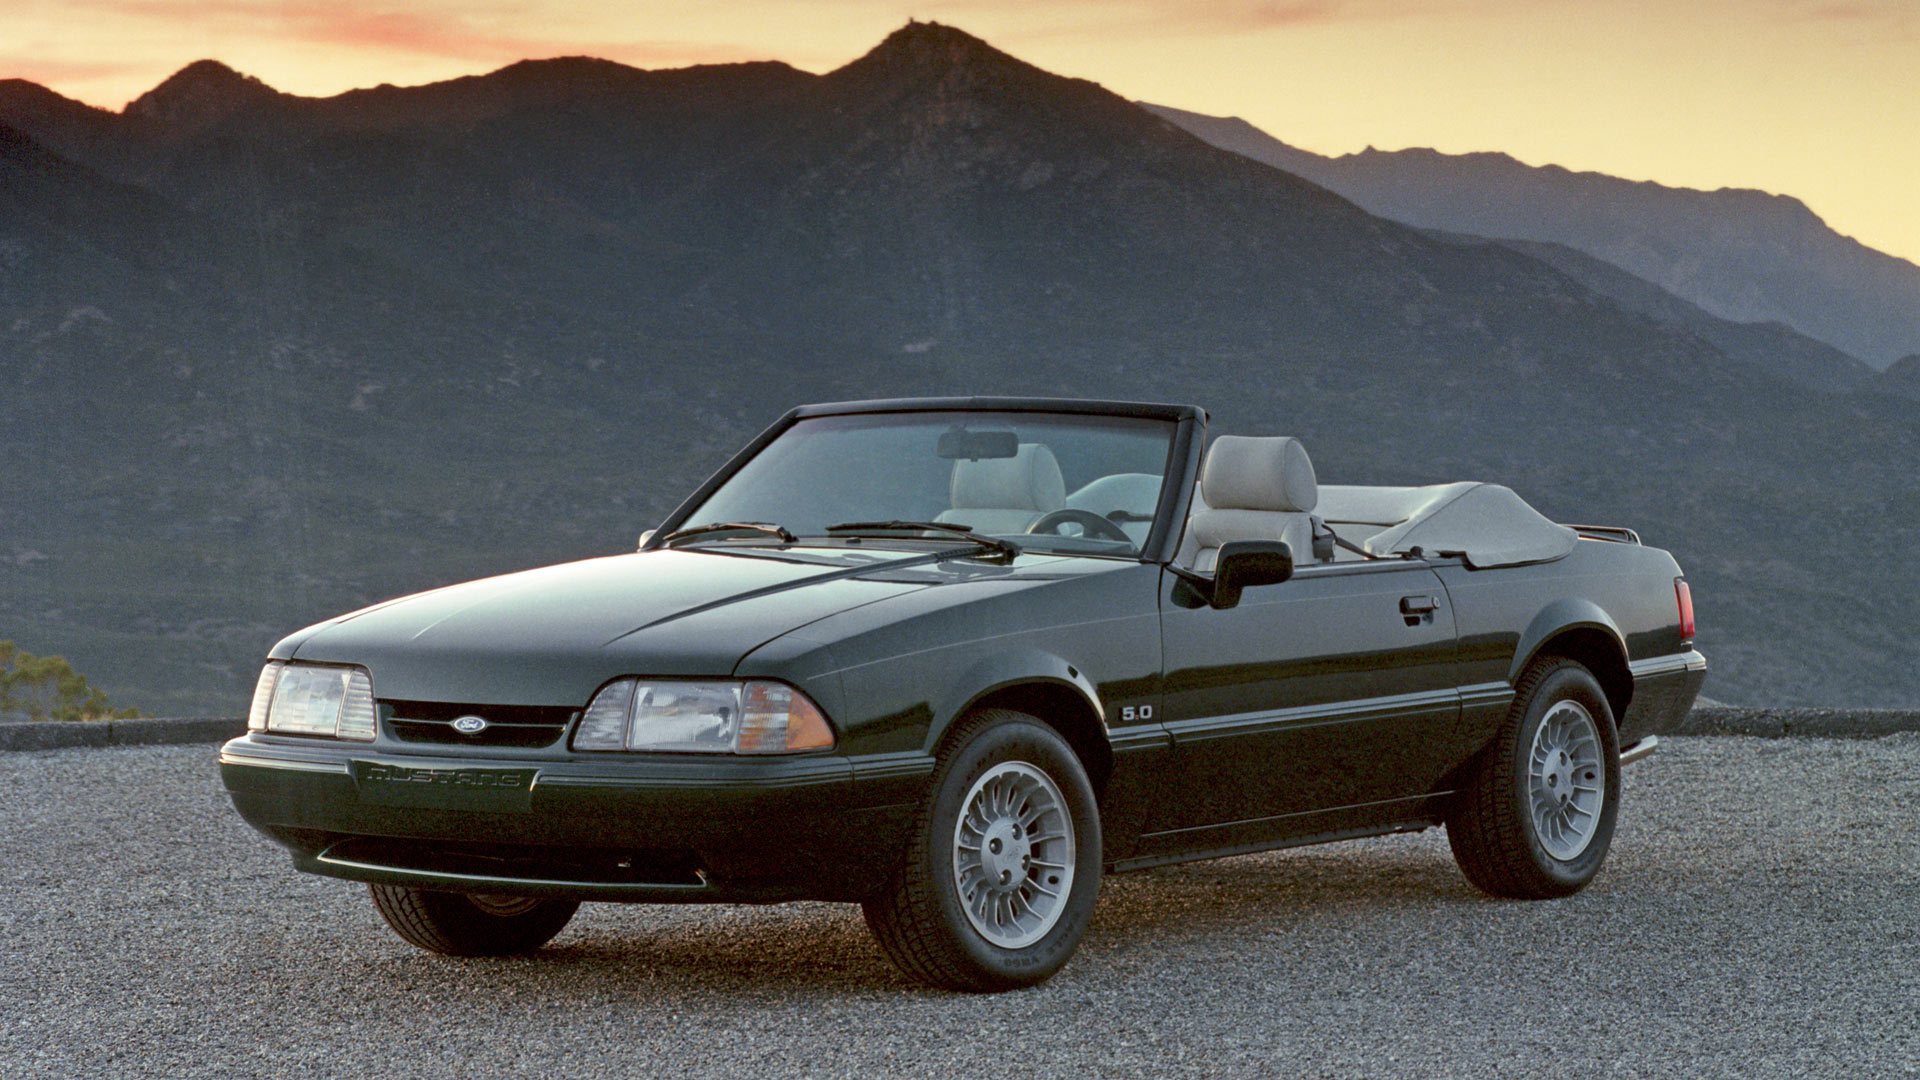 25th anniversary of the Ford Mustang